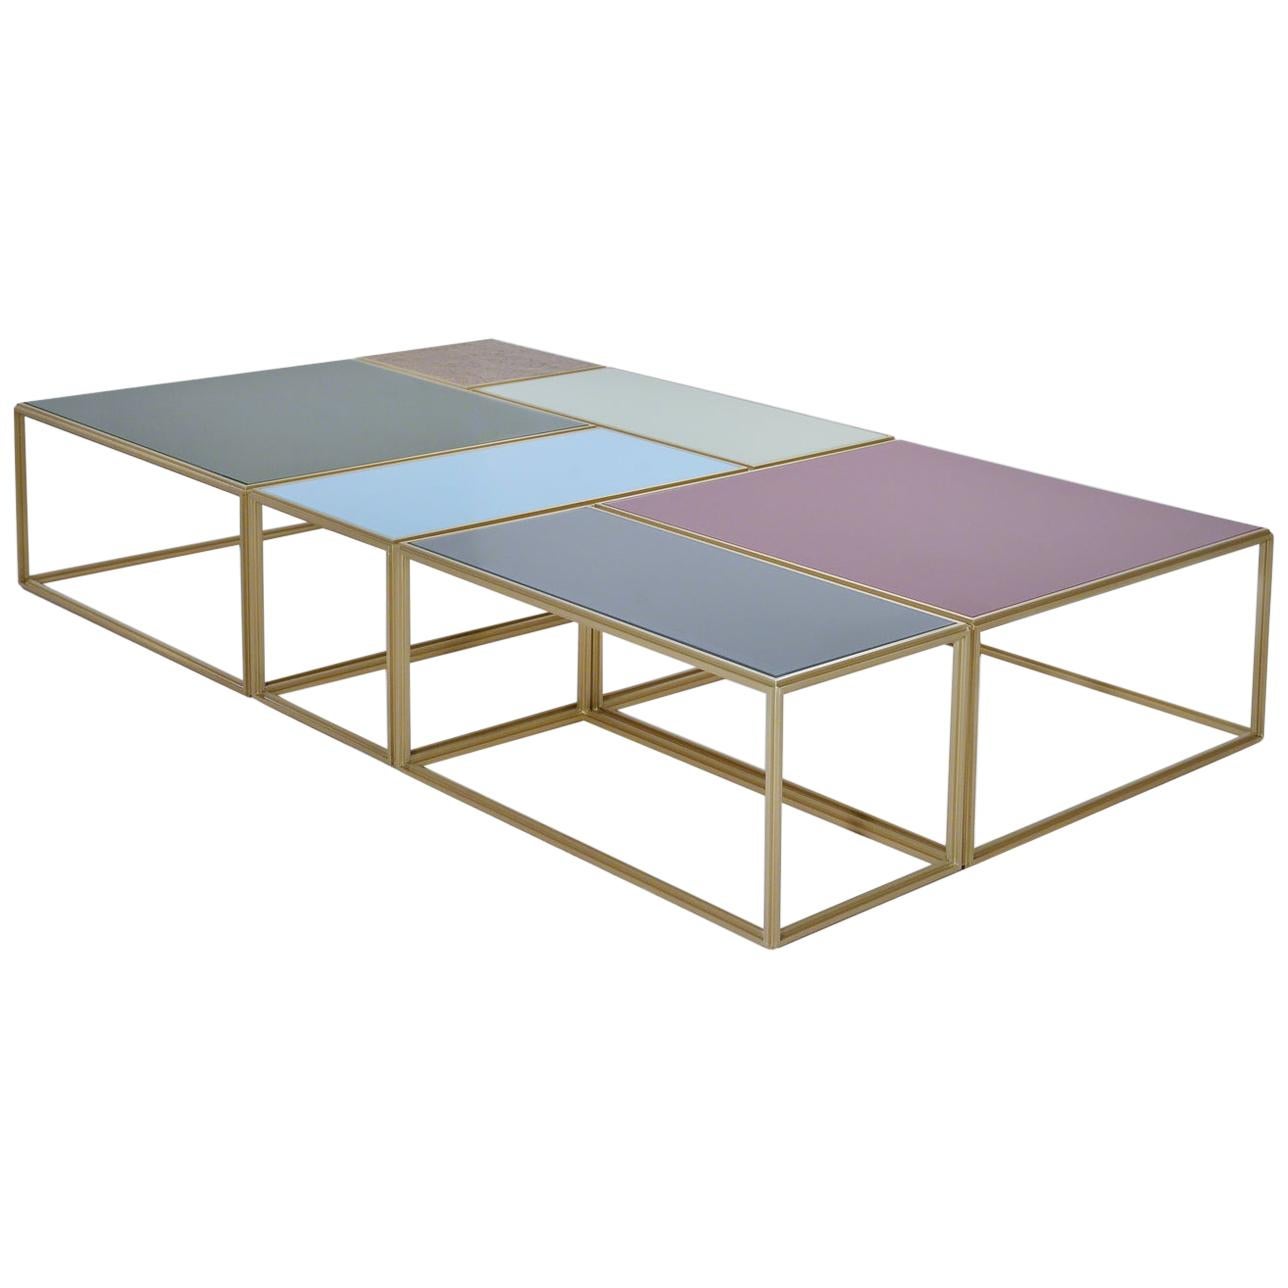 Modular "Mondrian" Brass, Bronze and Glass Low Table, by P. Tendercool